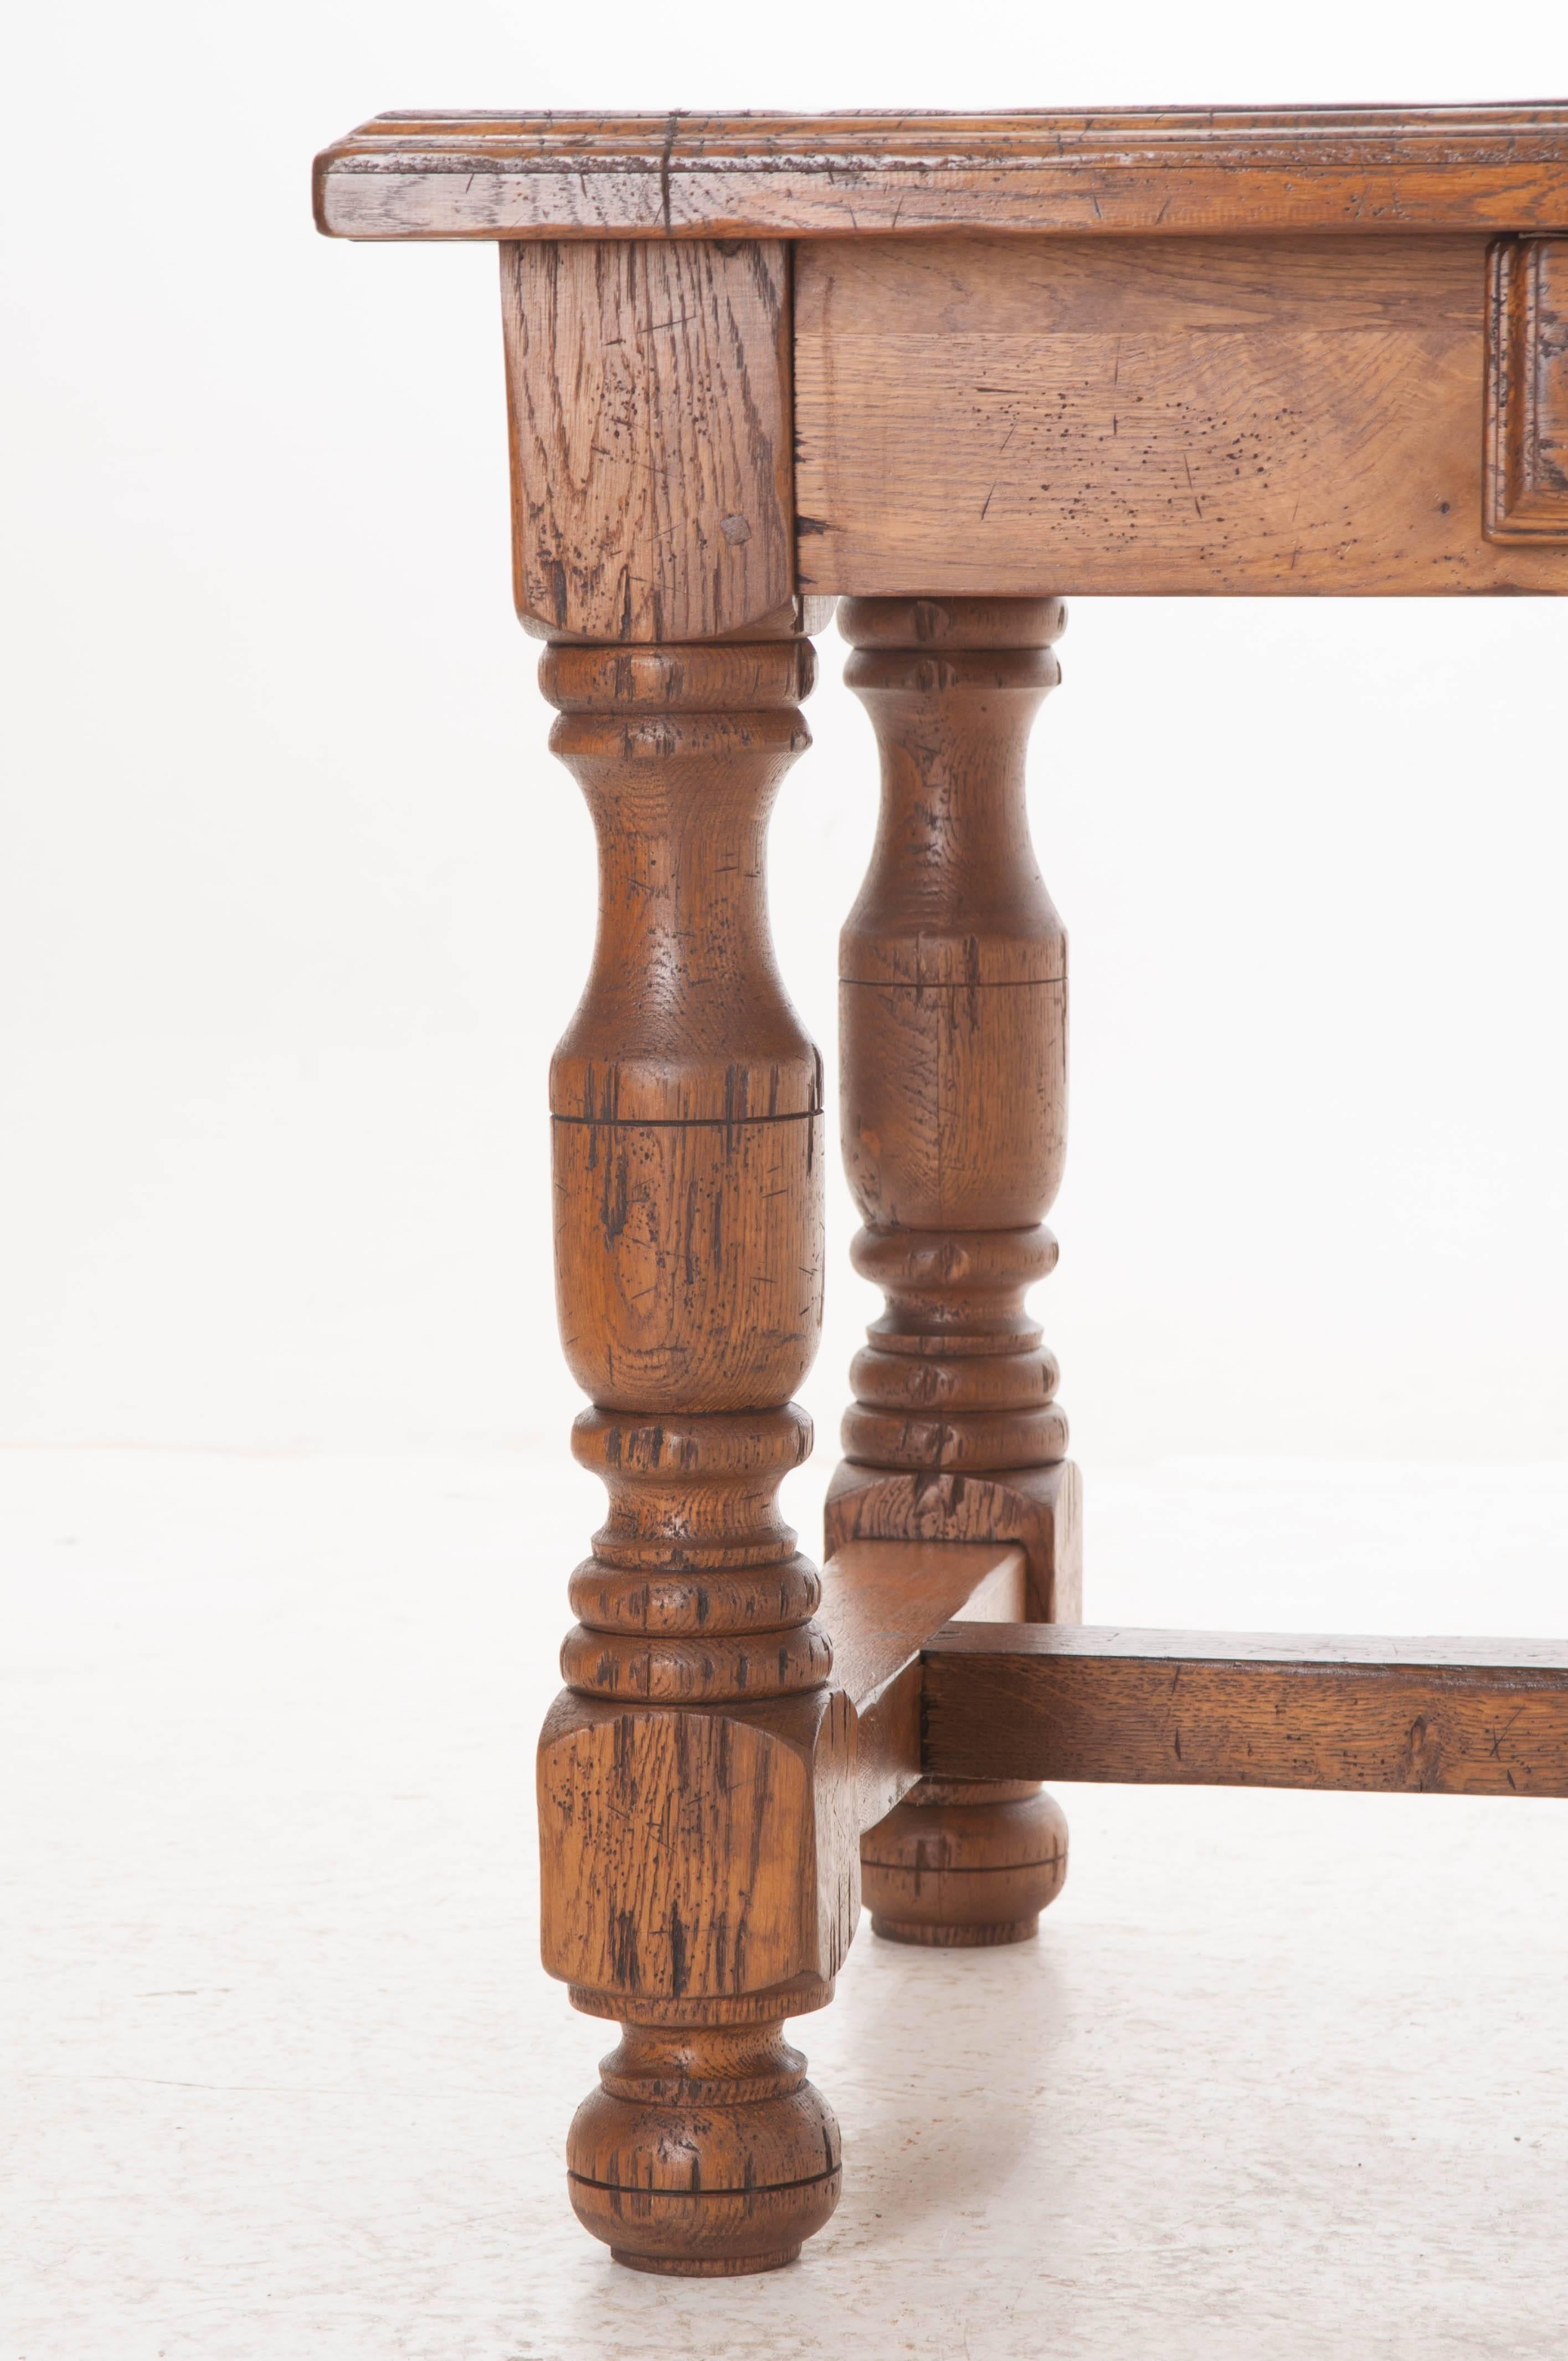 This wonderful French solid oak table was made circa 1860 using thick, weighty pieces of honey toned oak. A fresh coat of French wax and hand-polish have amplified the natural beauty found in the antique oak. The table has a drawer found in the